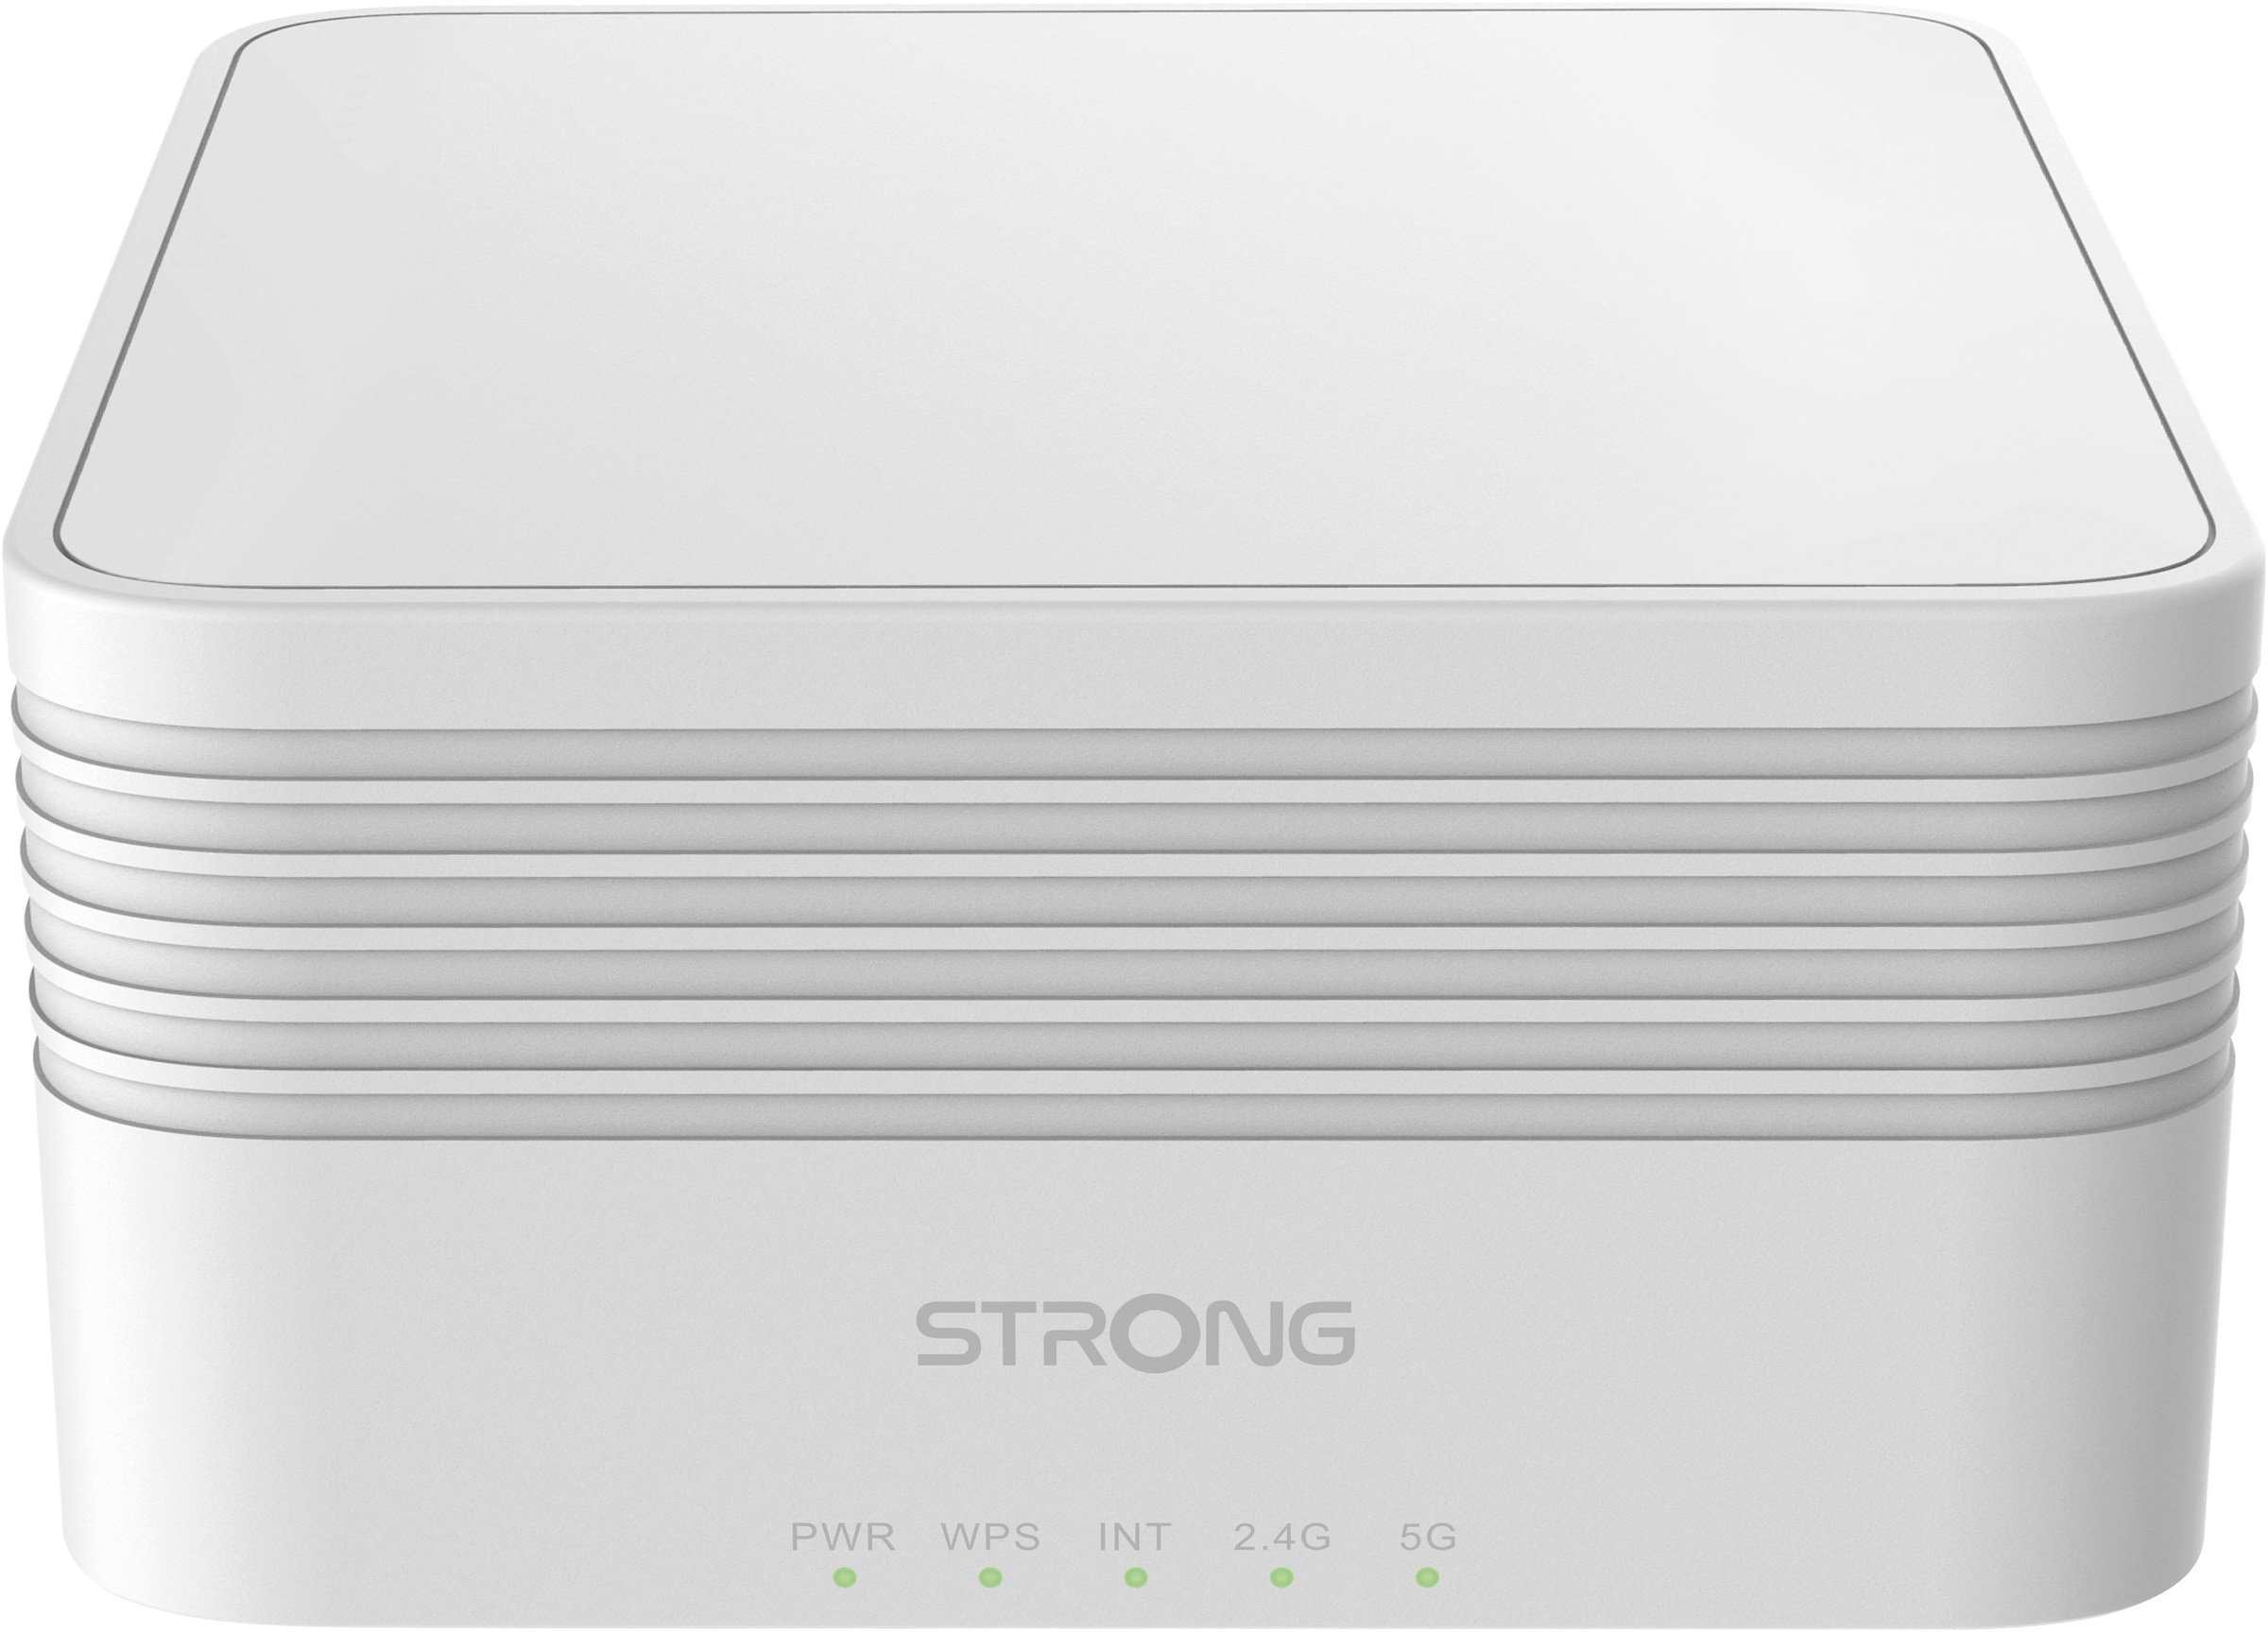 Strong WLAN-Repeater »Mesh Home Kit AX3000«, 2x Extender in duo Pack